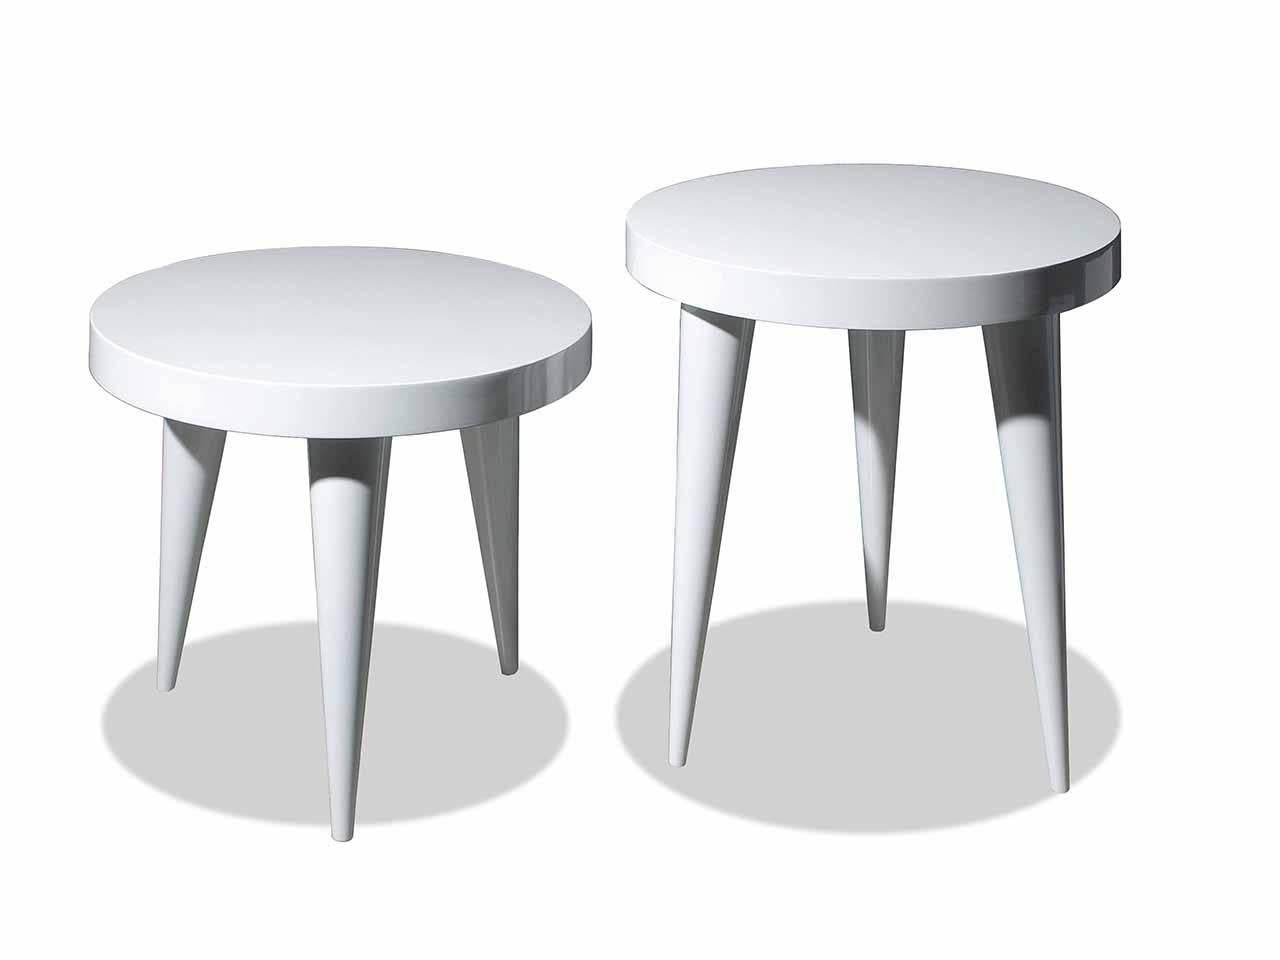 Simple, elegant and functional matching round side tables with three legs.

Colors option: White, ivory, black, coffee.

Finish option: Matte or gloss lacquered. 

Size option: 
Diam 56cm H 45 cm.
Diam 56 cm H 56cm.
Top 5 cm thick.

Set